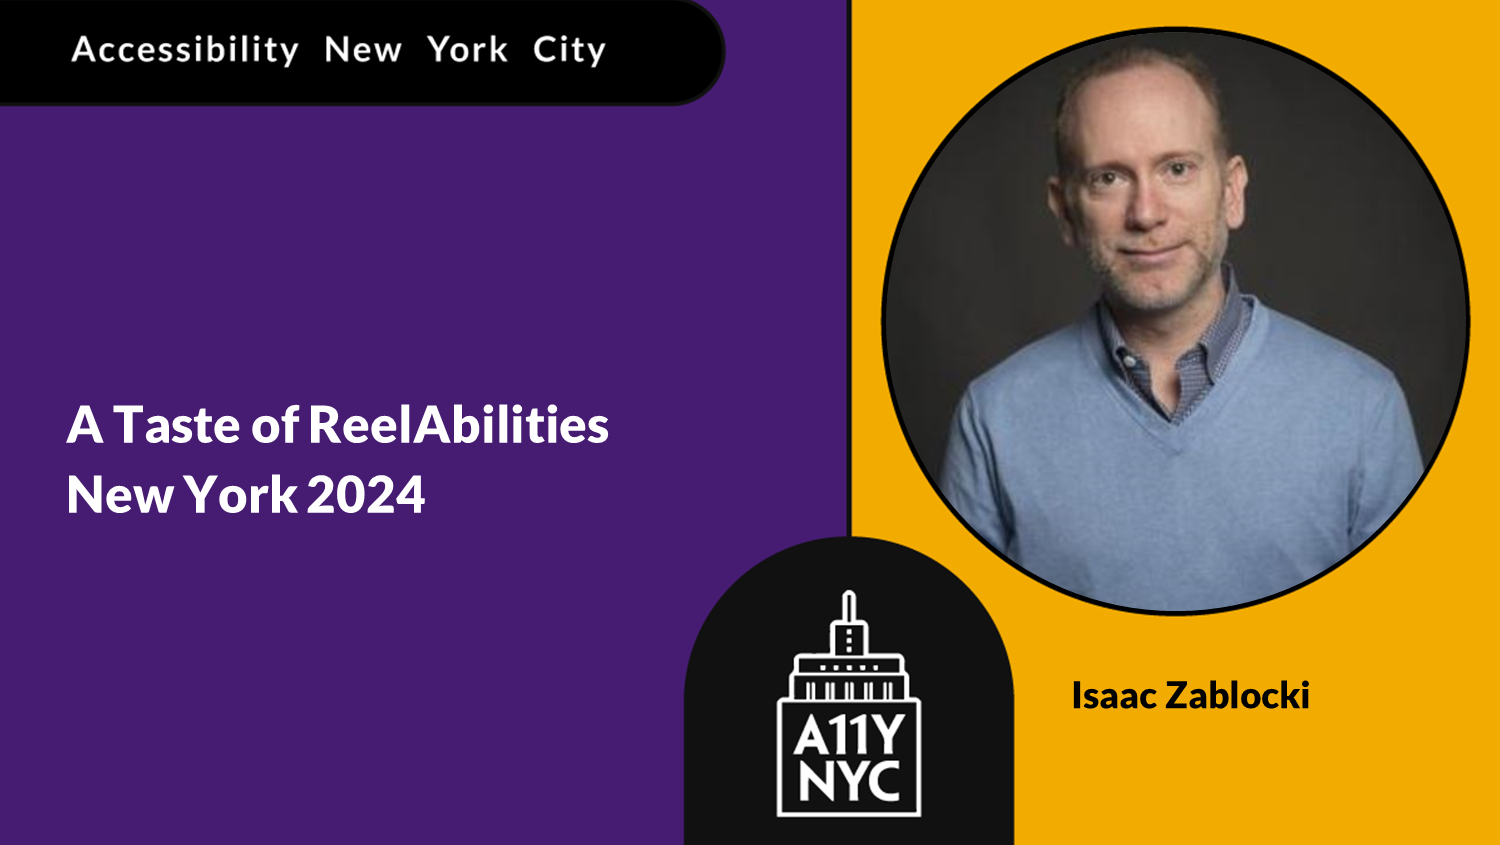 Accessibility New York City. A Taste of ReelAbilities New York 2024. Isaac Zablocki has a light complexion, thinning hair, and a light blue collared shirt under a lighter blue sweater